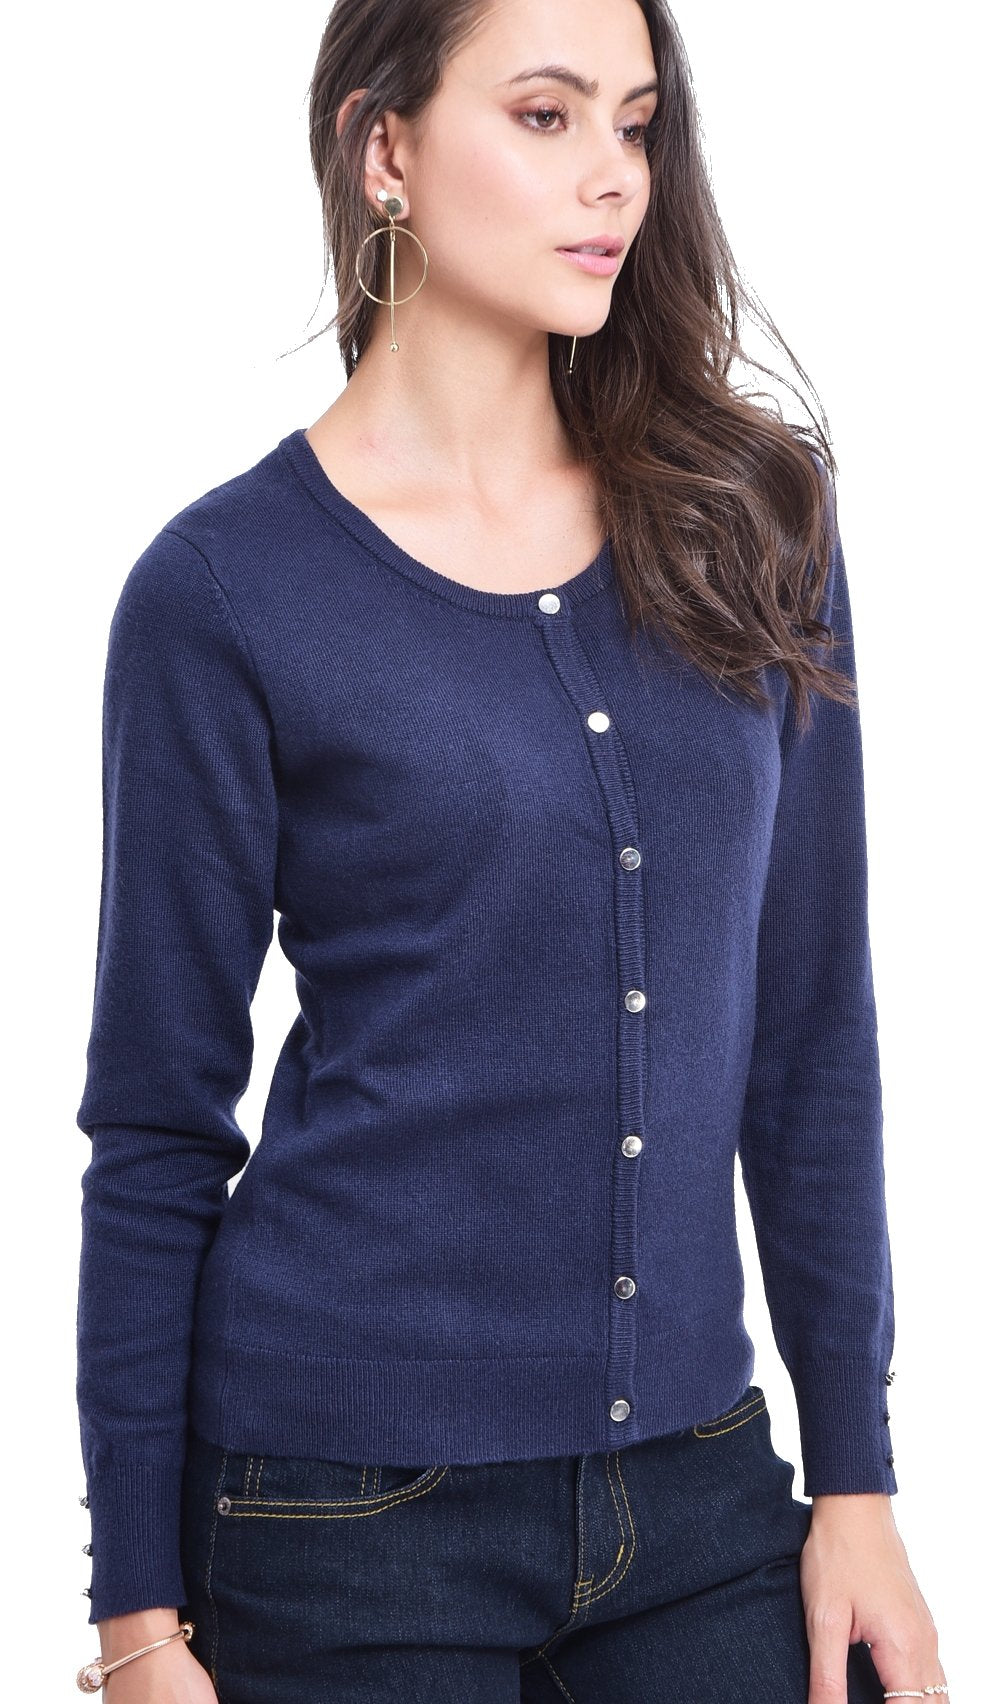 BUTTONED ROUND COLLAR BASIC CARDIGAN WITH BUTTONS ON SLEEVES